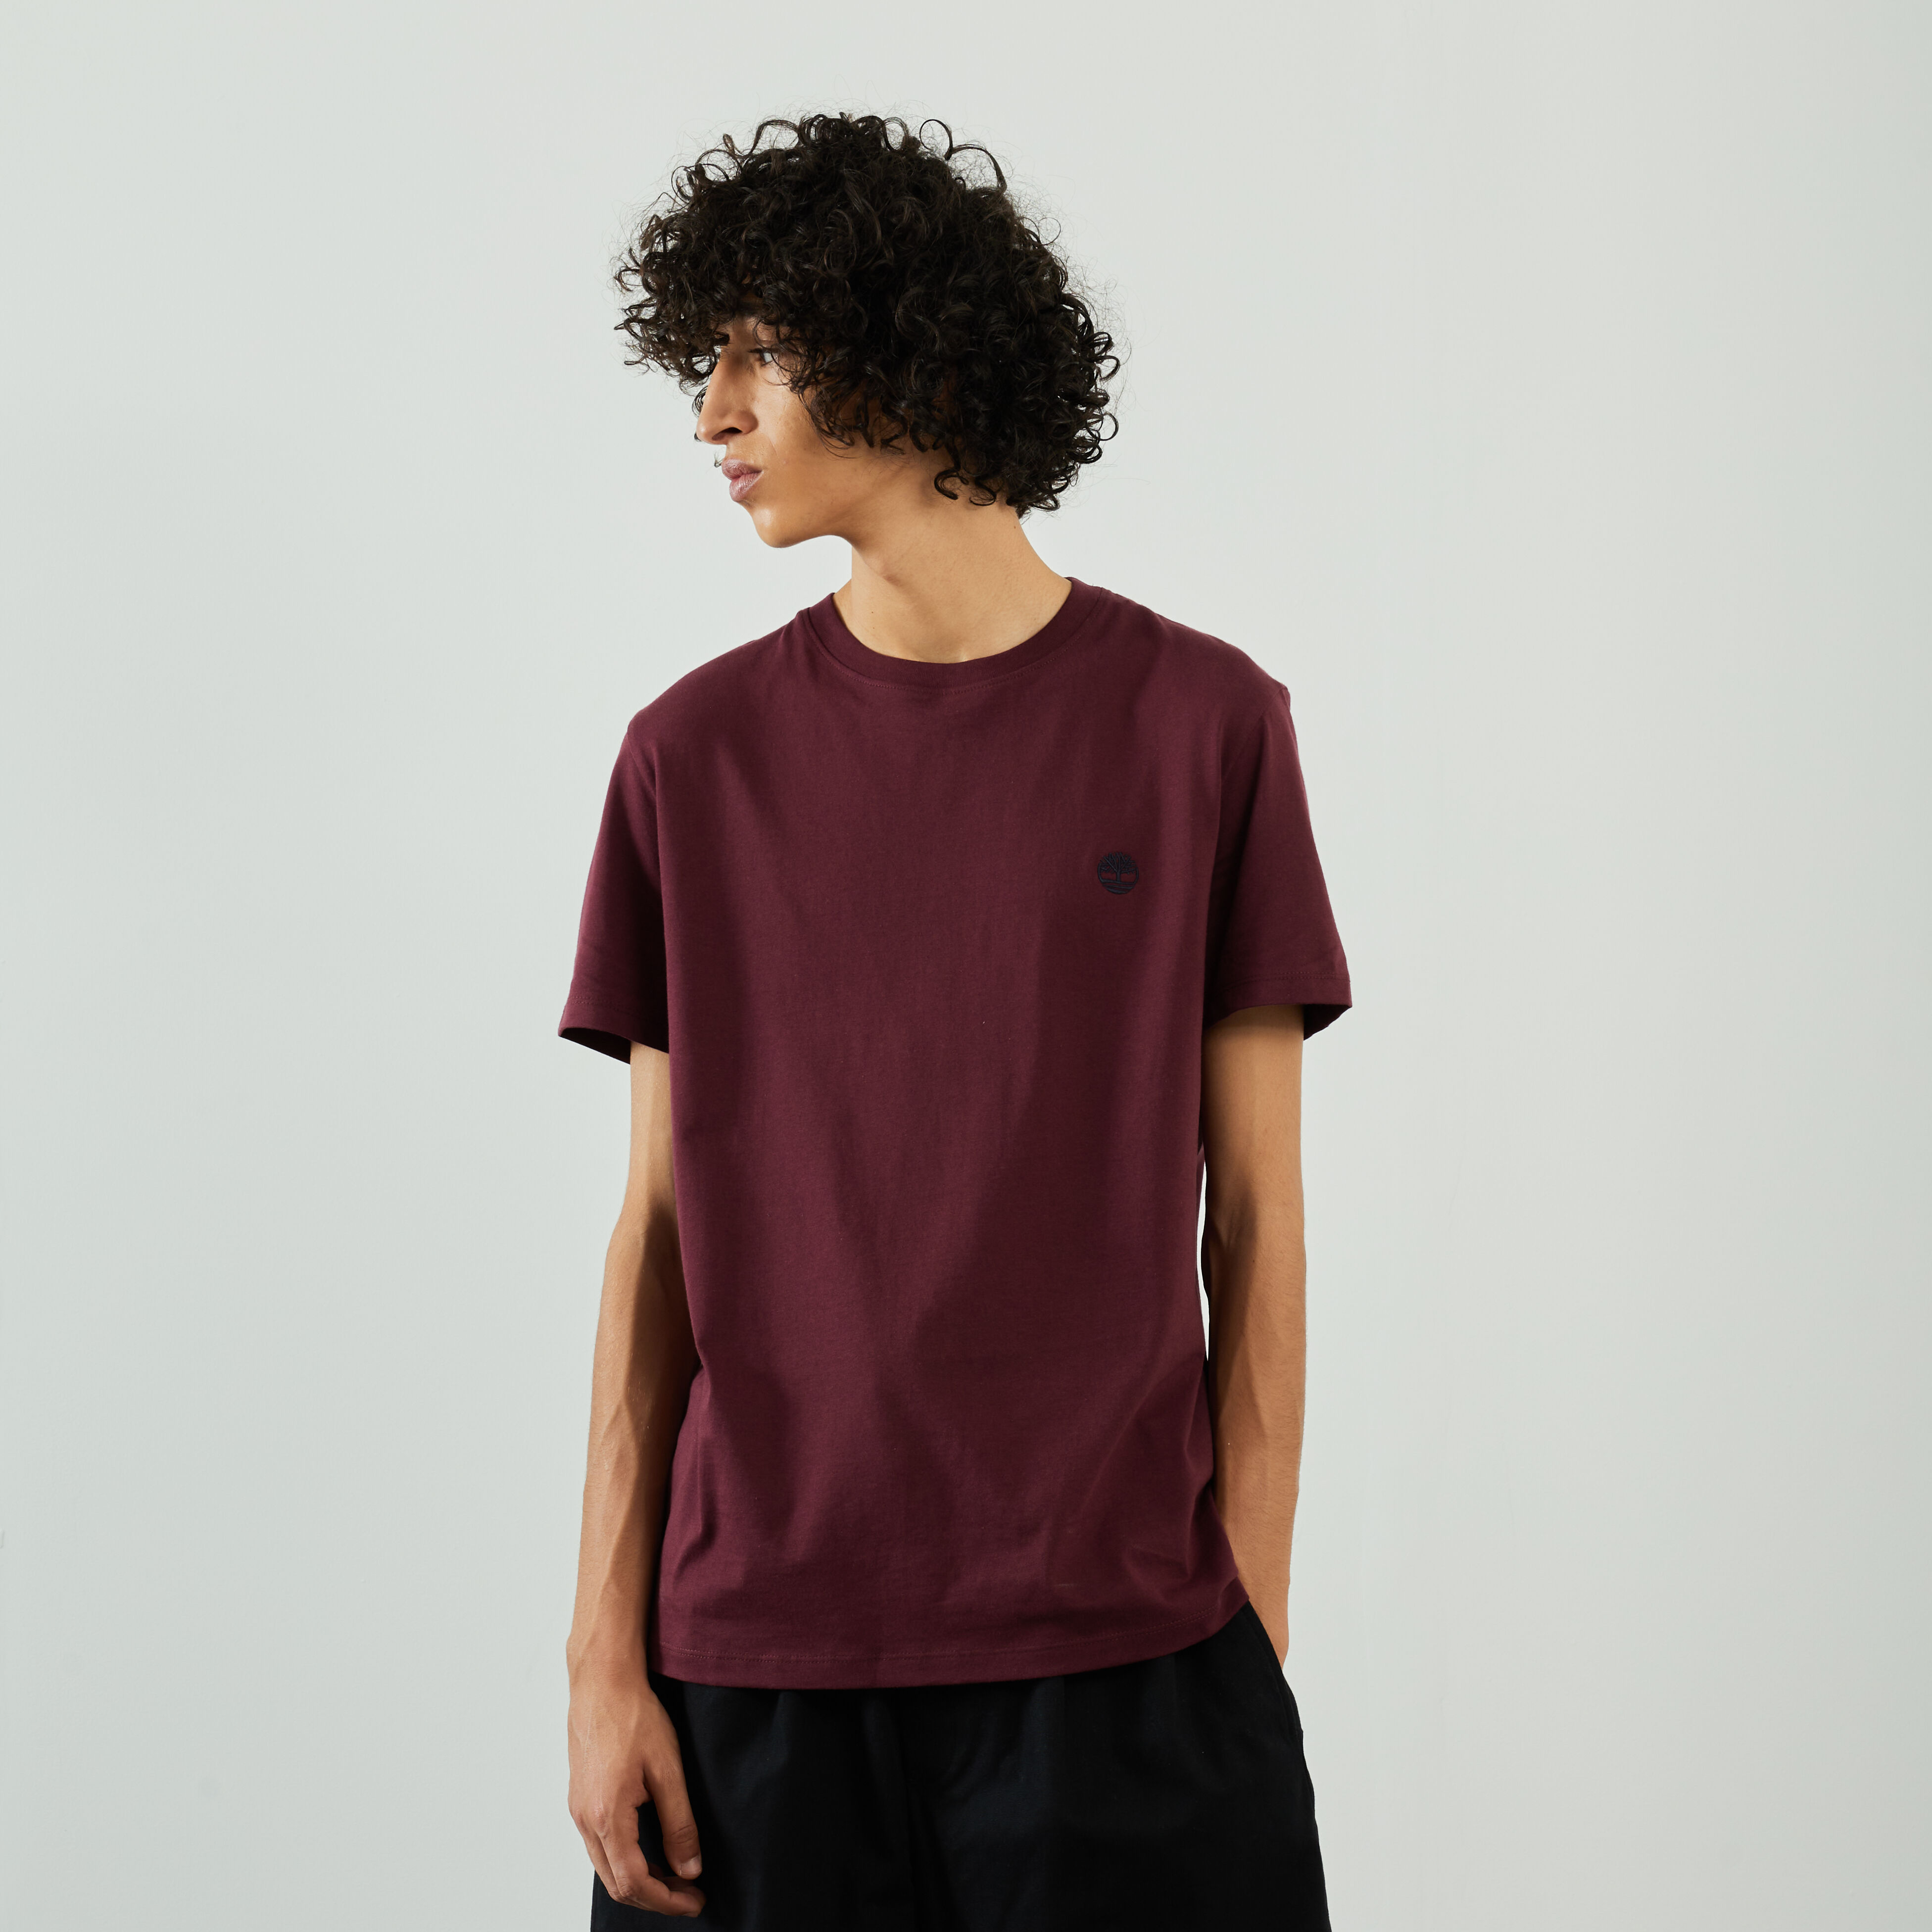 Timberland Tee Shirt River Small Logo bordeaux s homme